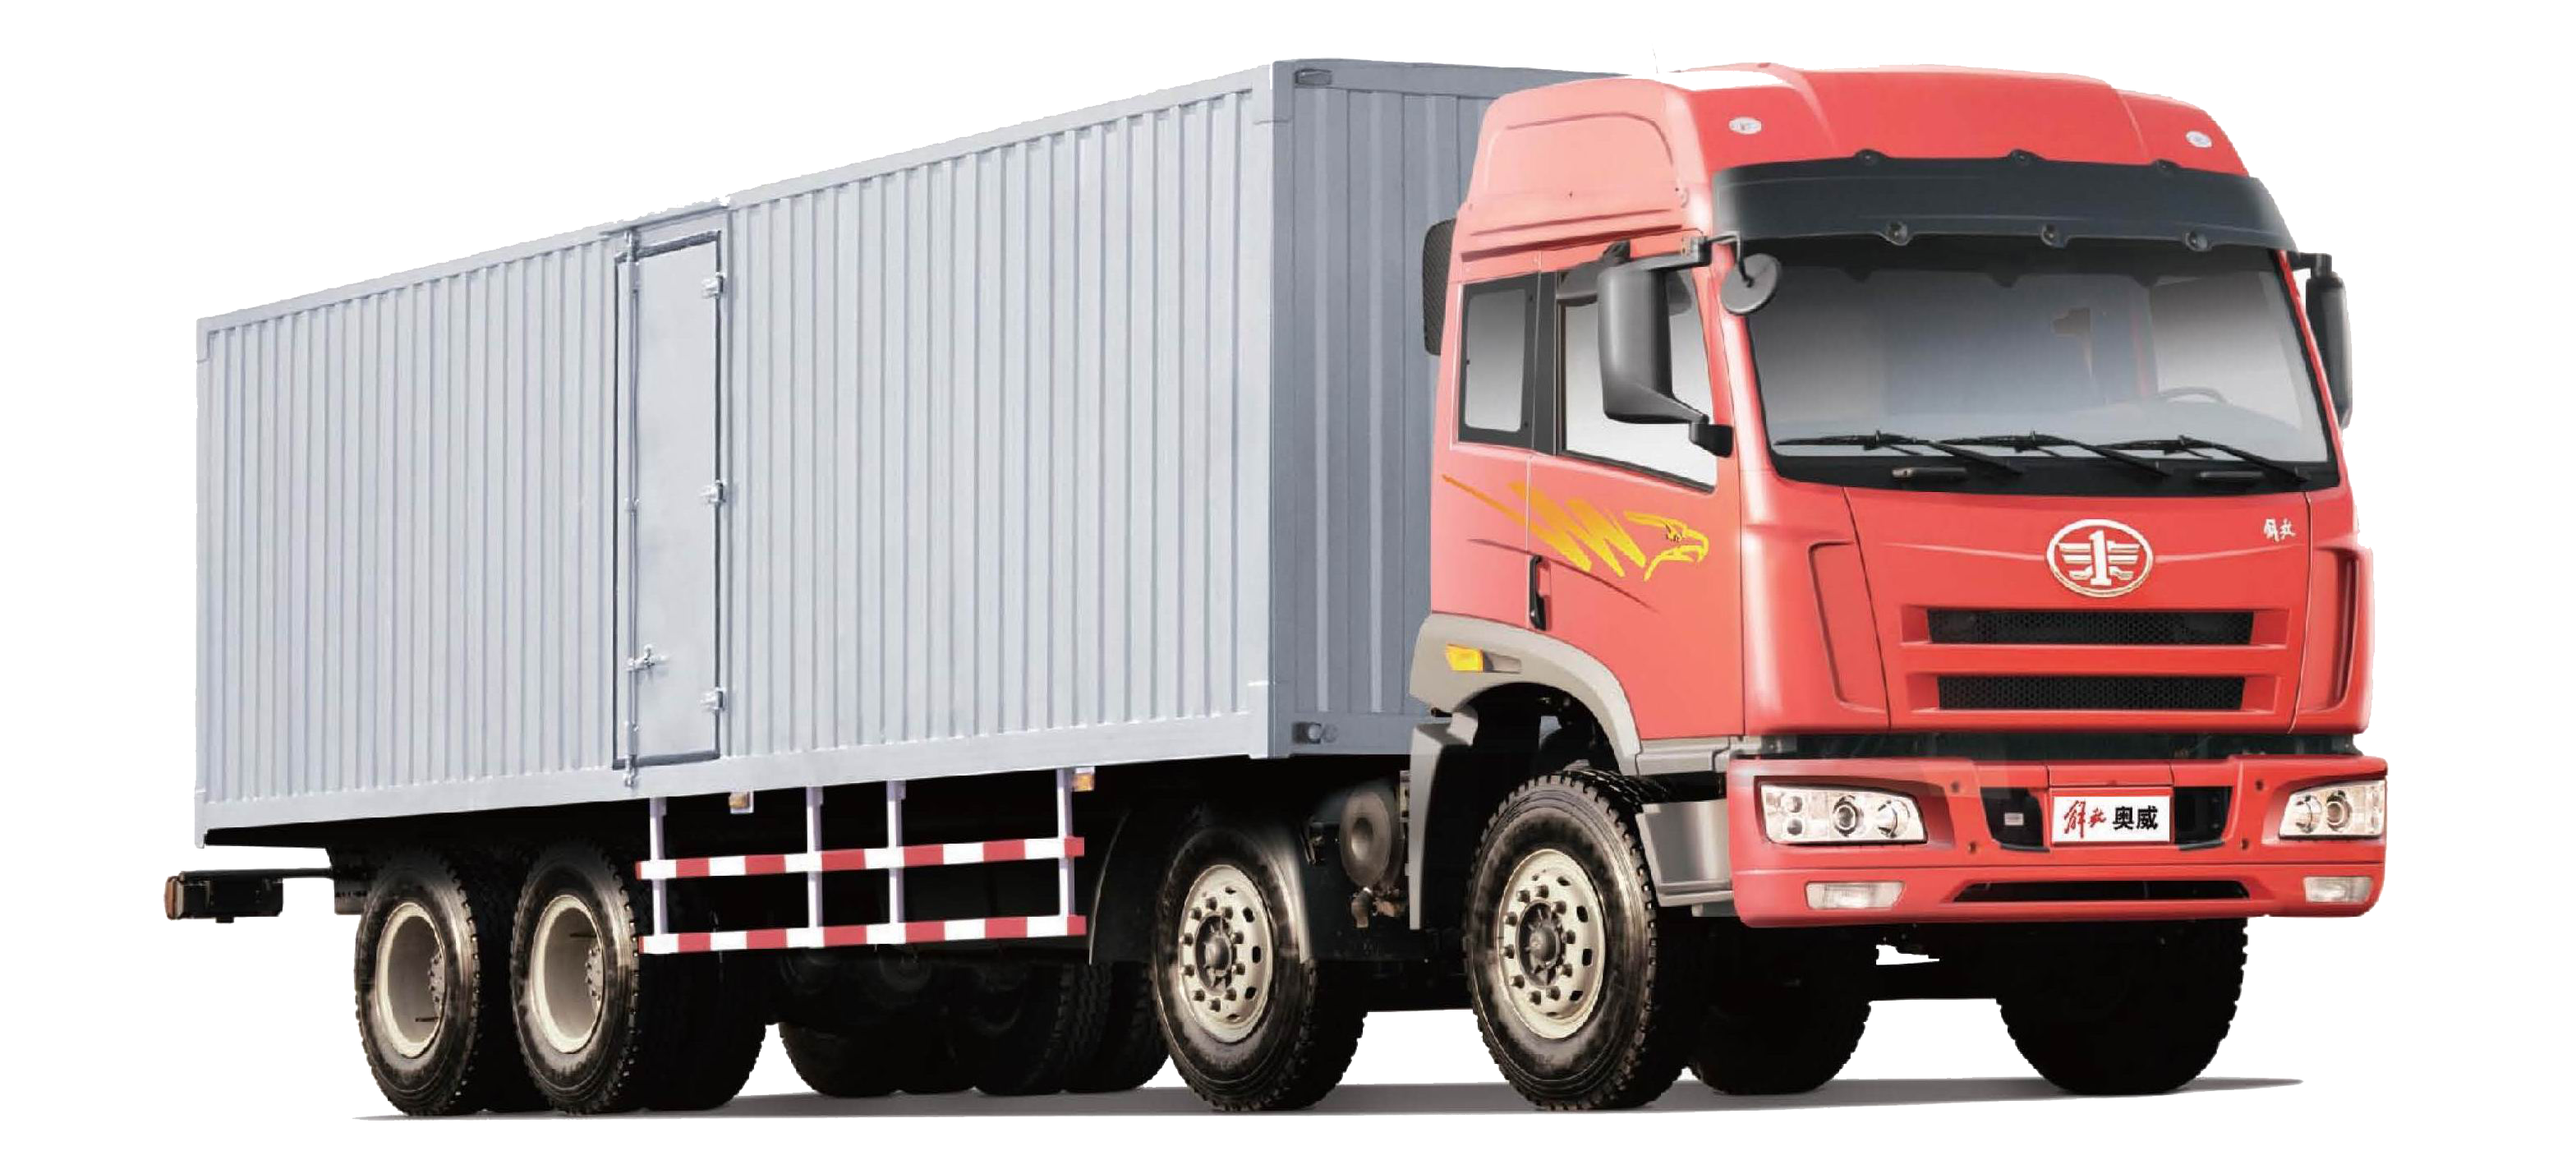 Cargo Truck Png - Truck, Transparent background PNG HD thumbnail